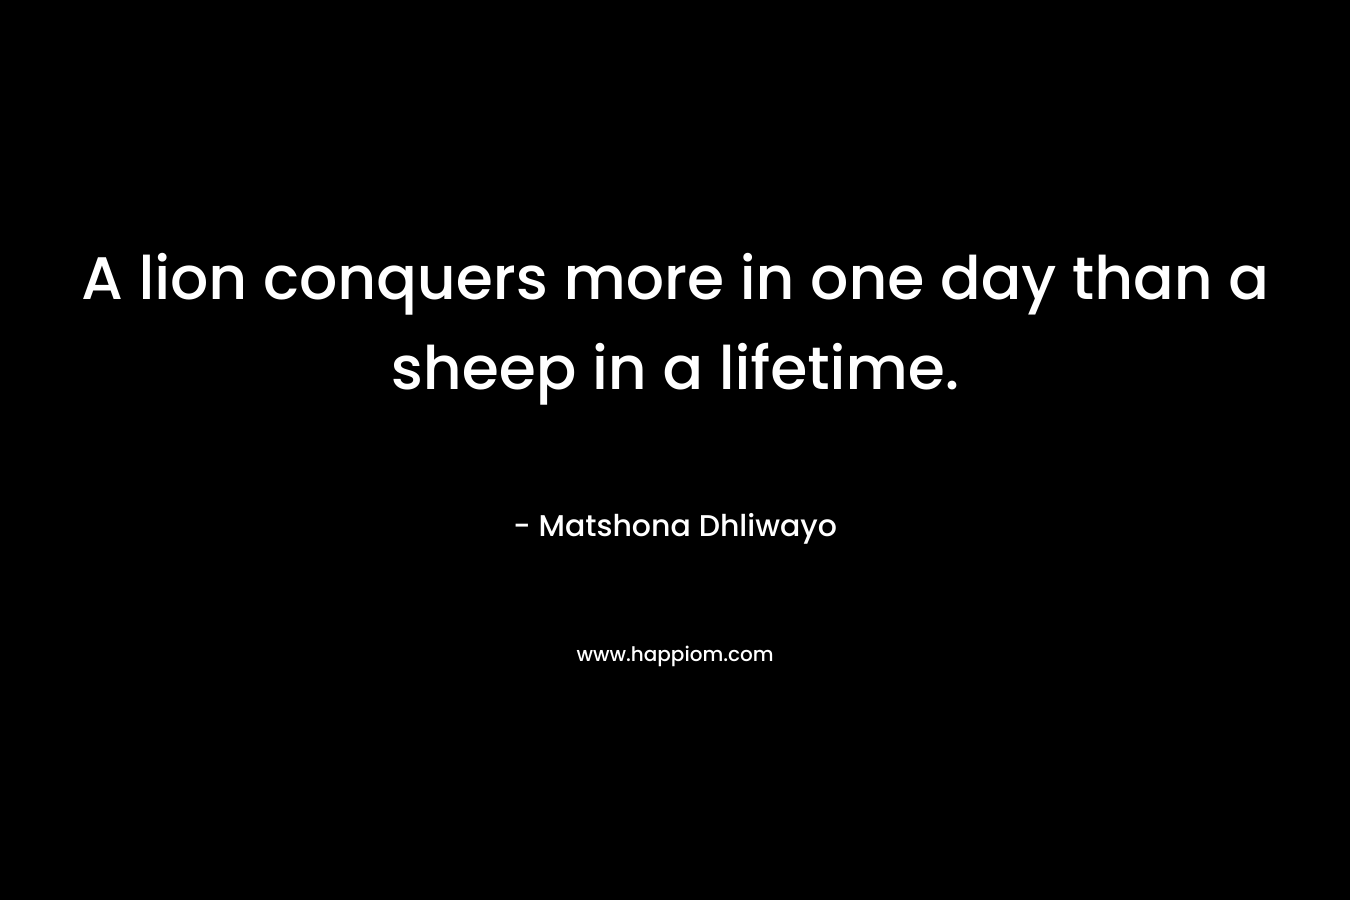 A lion conquers more in one day than a sheep in a lifetime.